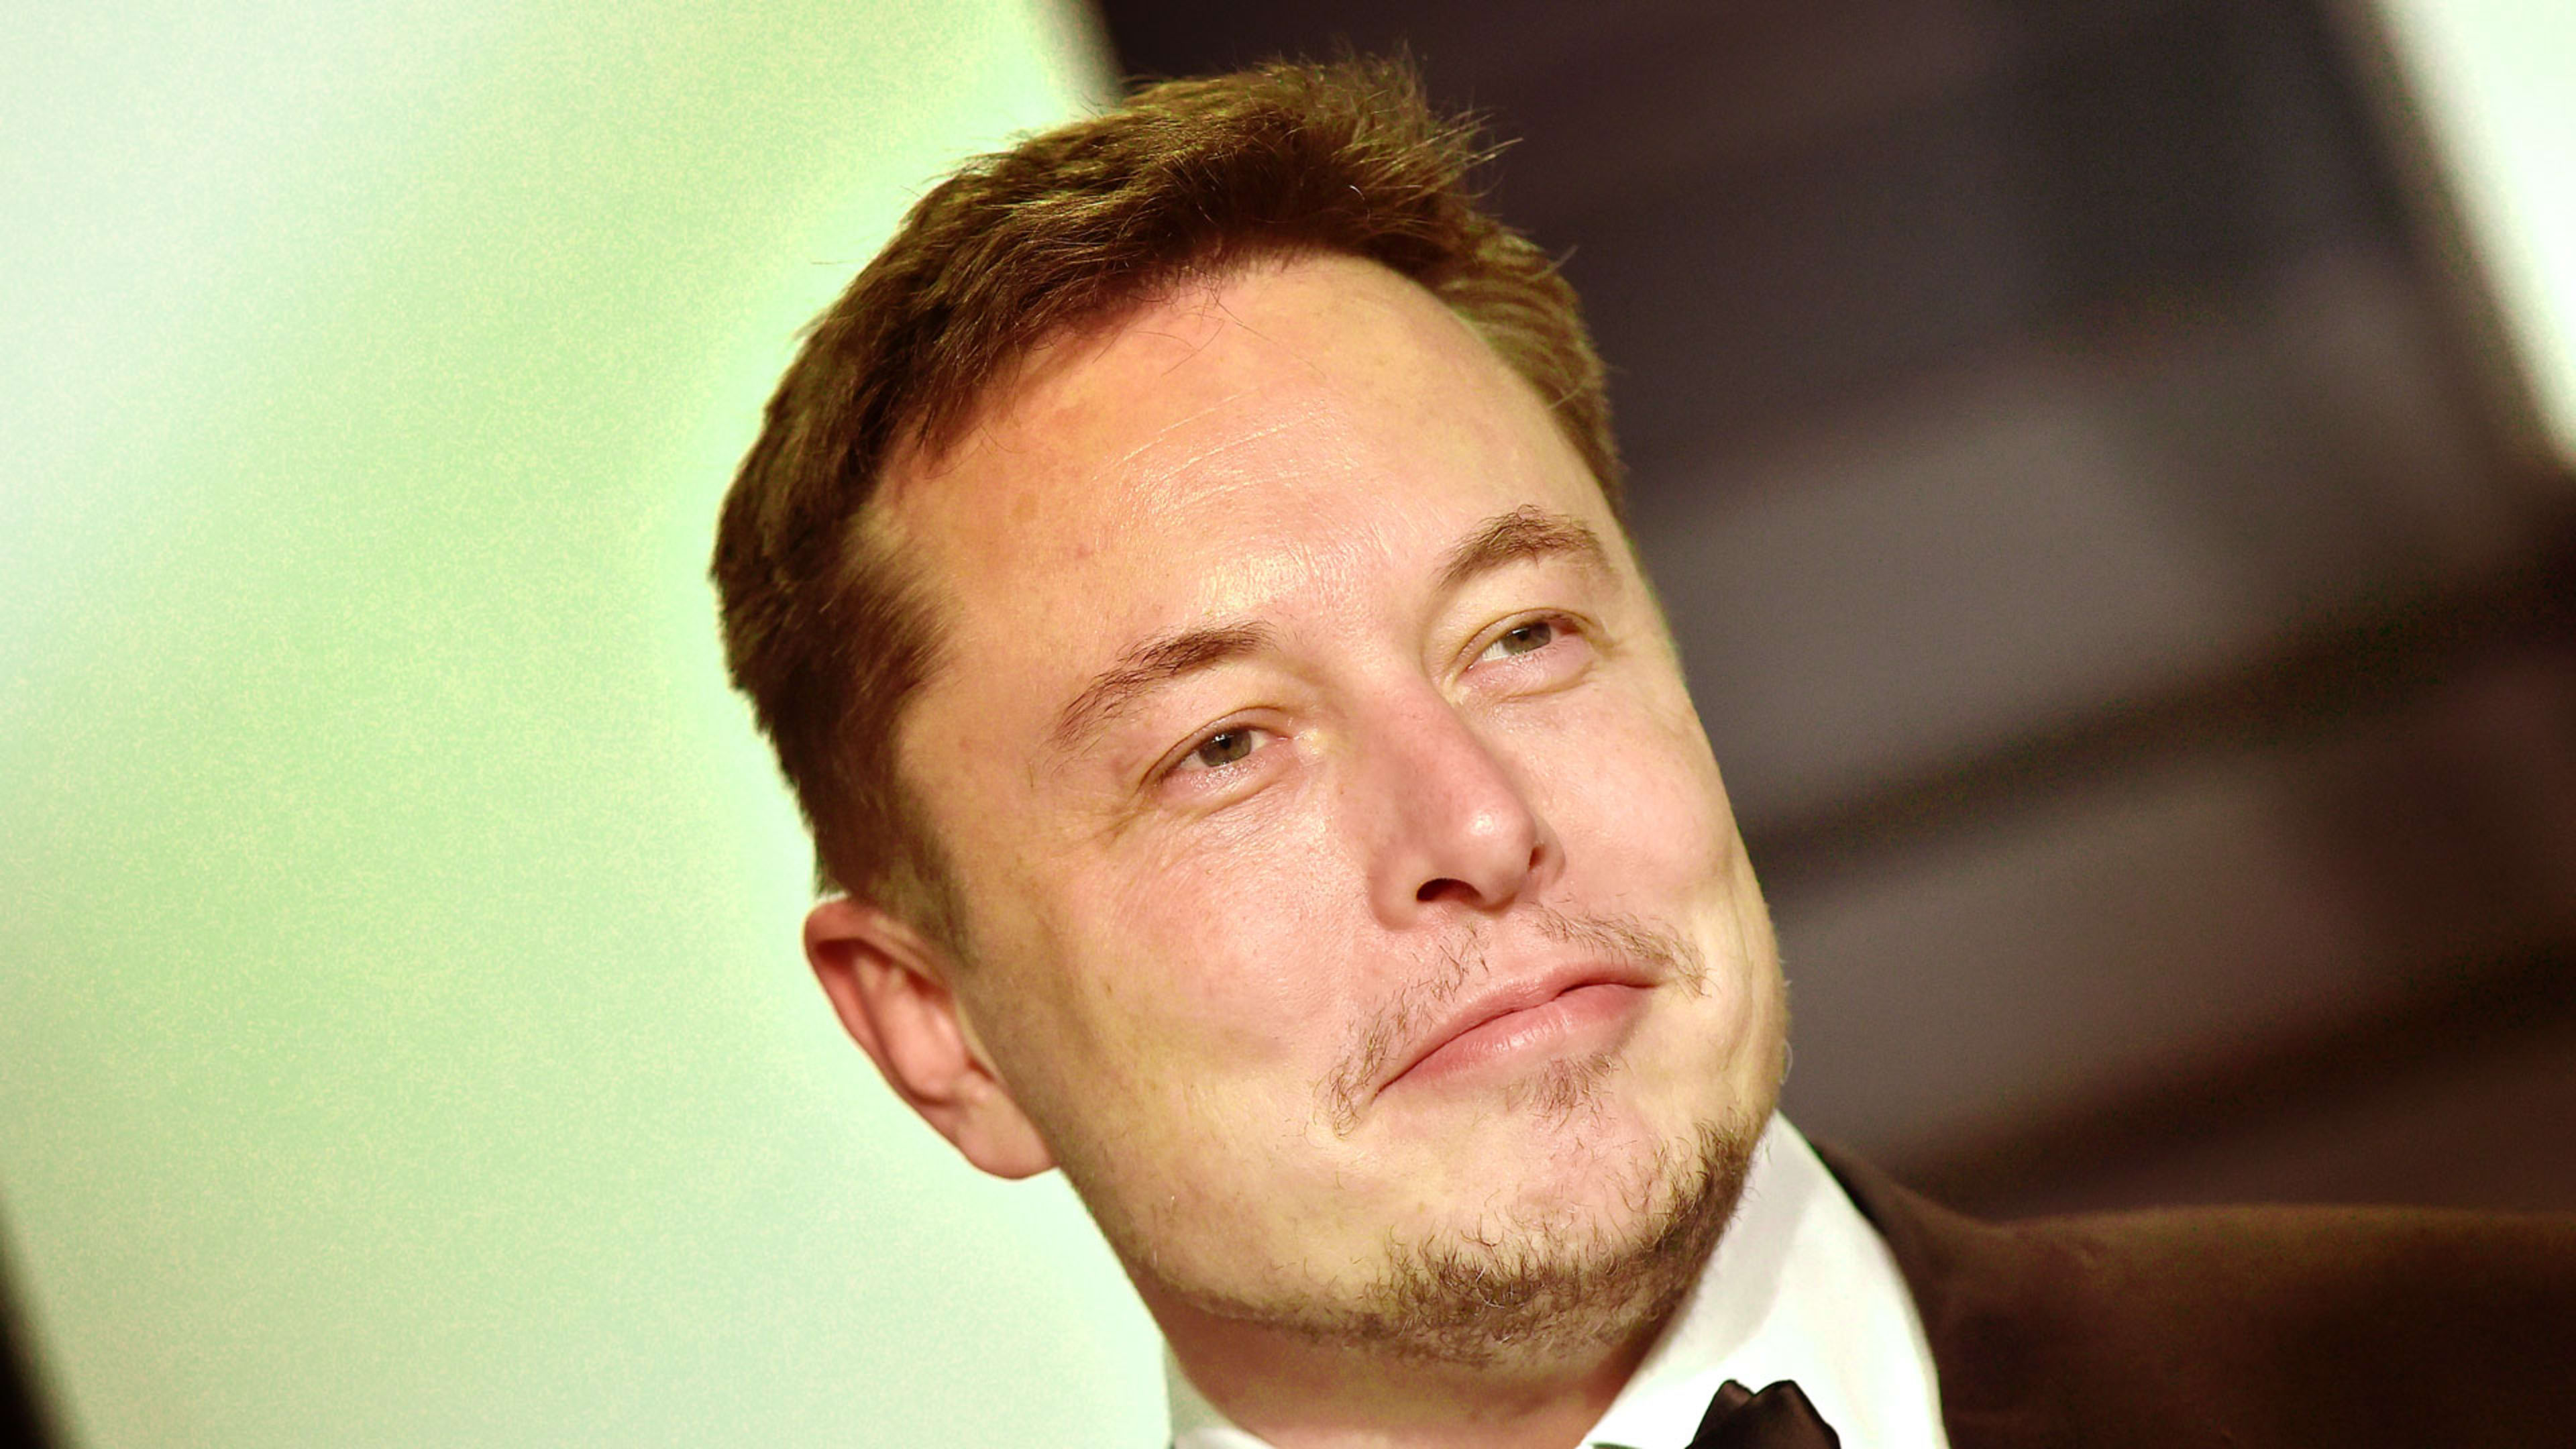 Elon Musk says he didn’t invent bitcoin